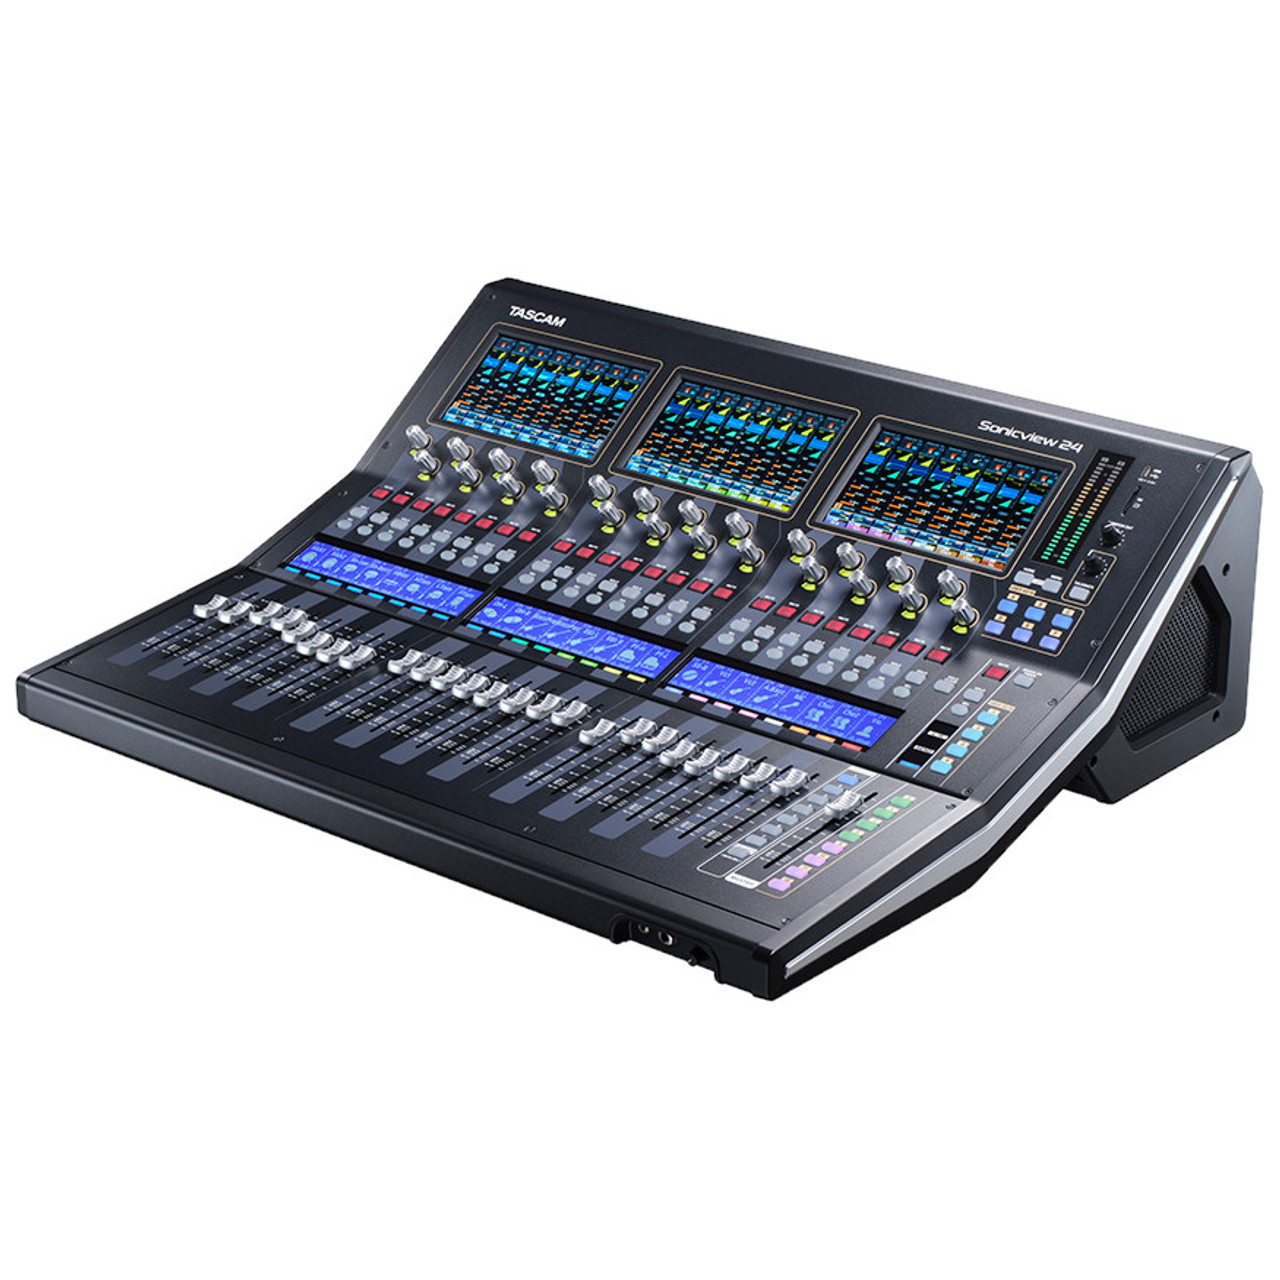 TASCAM Sonicview 24XP 32-Track Live Sound Digital Mixer - Sound Productions